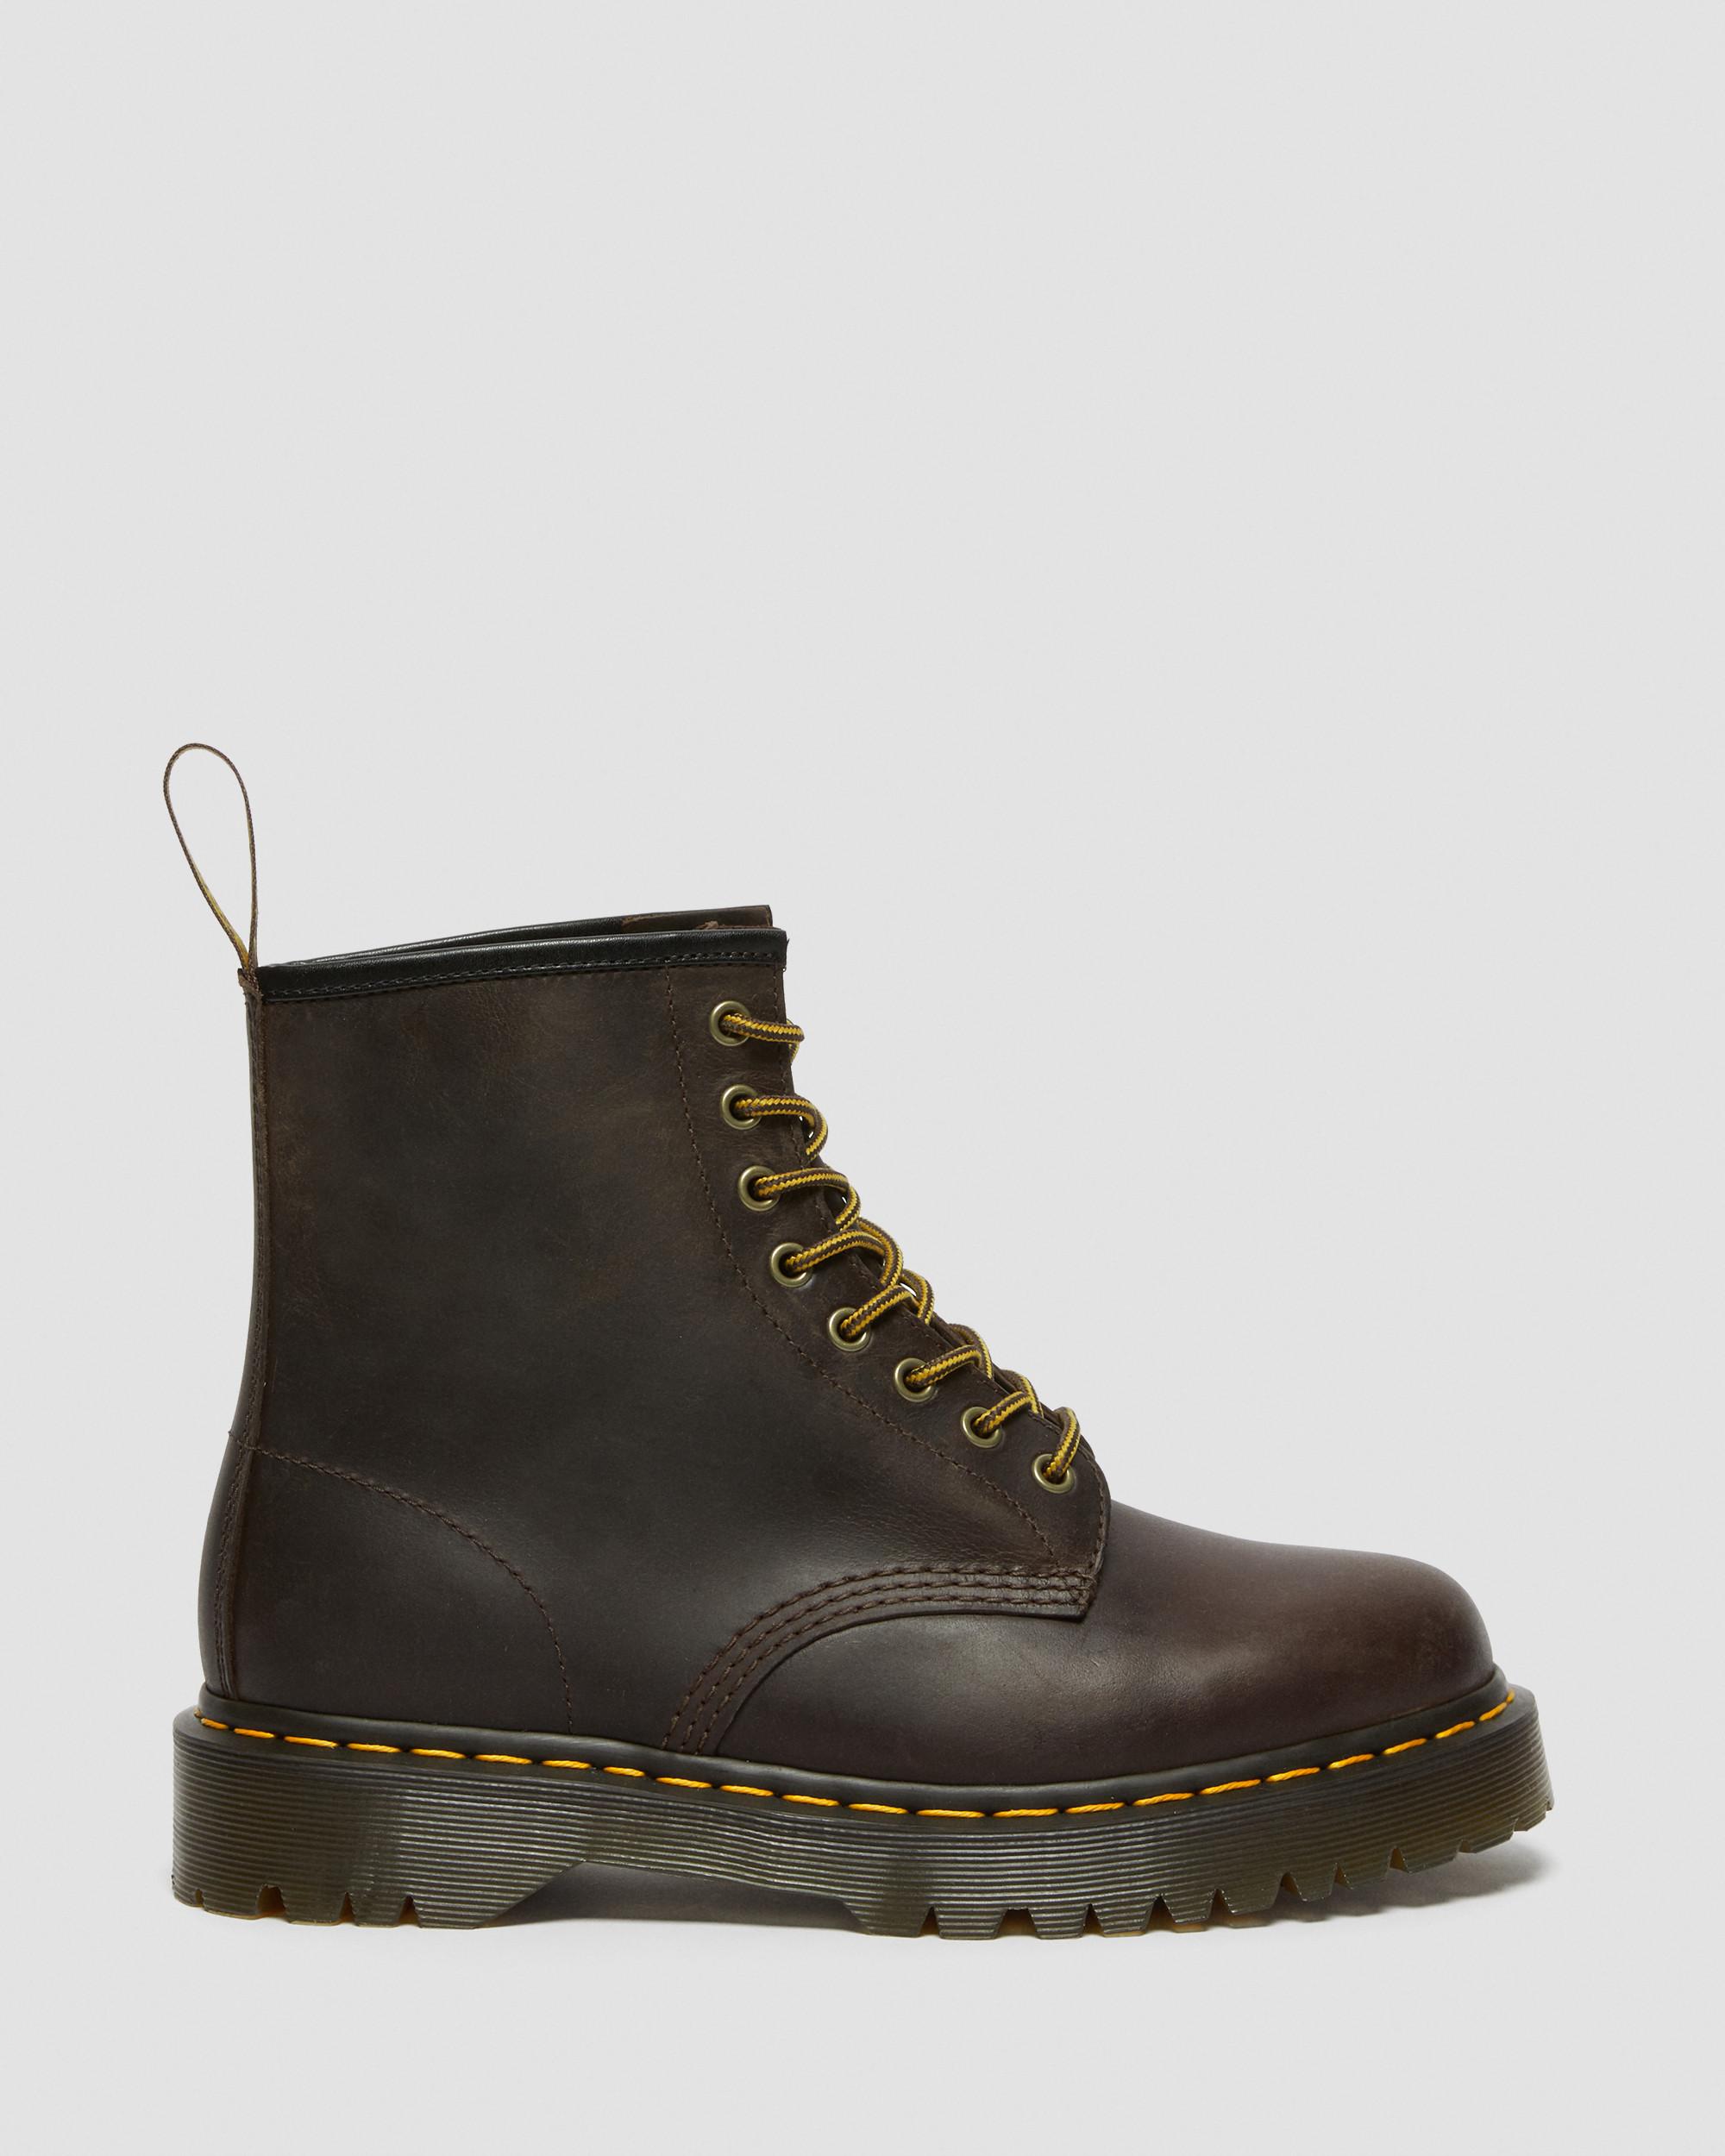 1460 Bex Crazy Horse Leather Lace Up Boots in Dark Brown | Dr. Martens